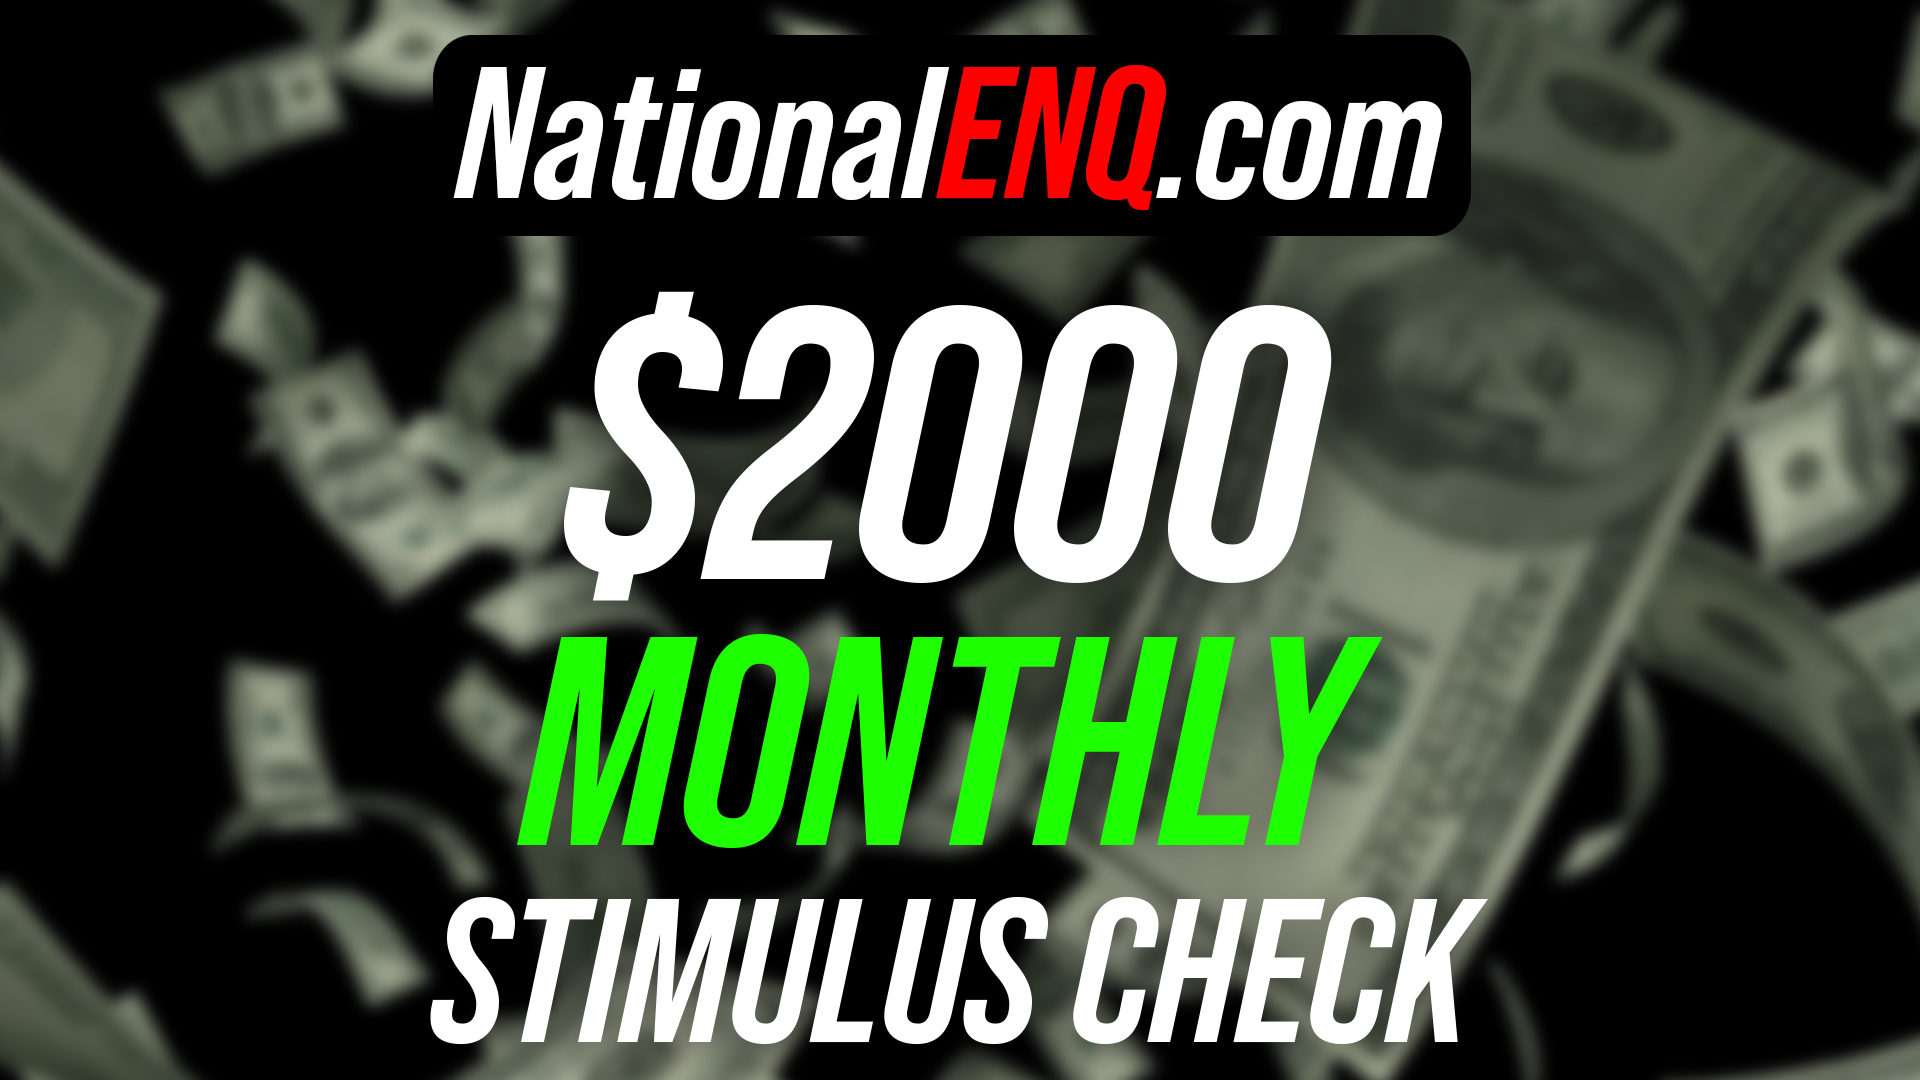 National ENQ White House Sources News: $2000 Monthly Stimulus Check for Americans, Amid Coronavirus (COVID-19) Pandemic